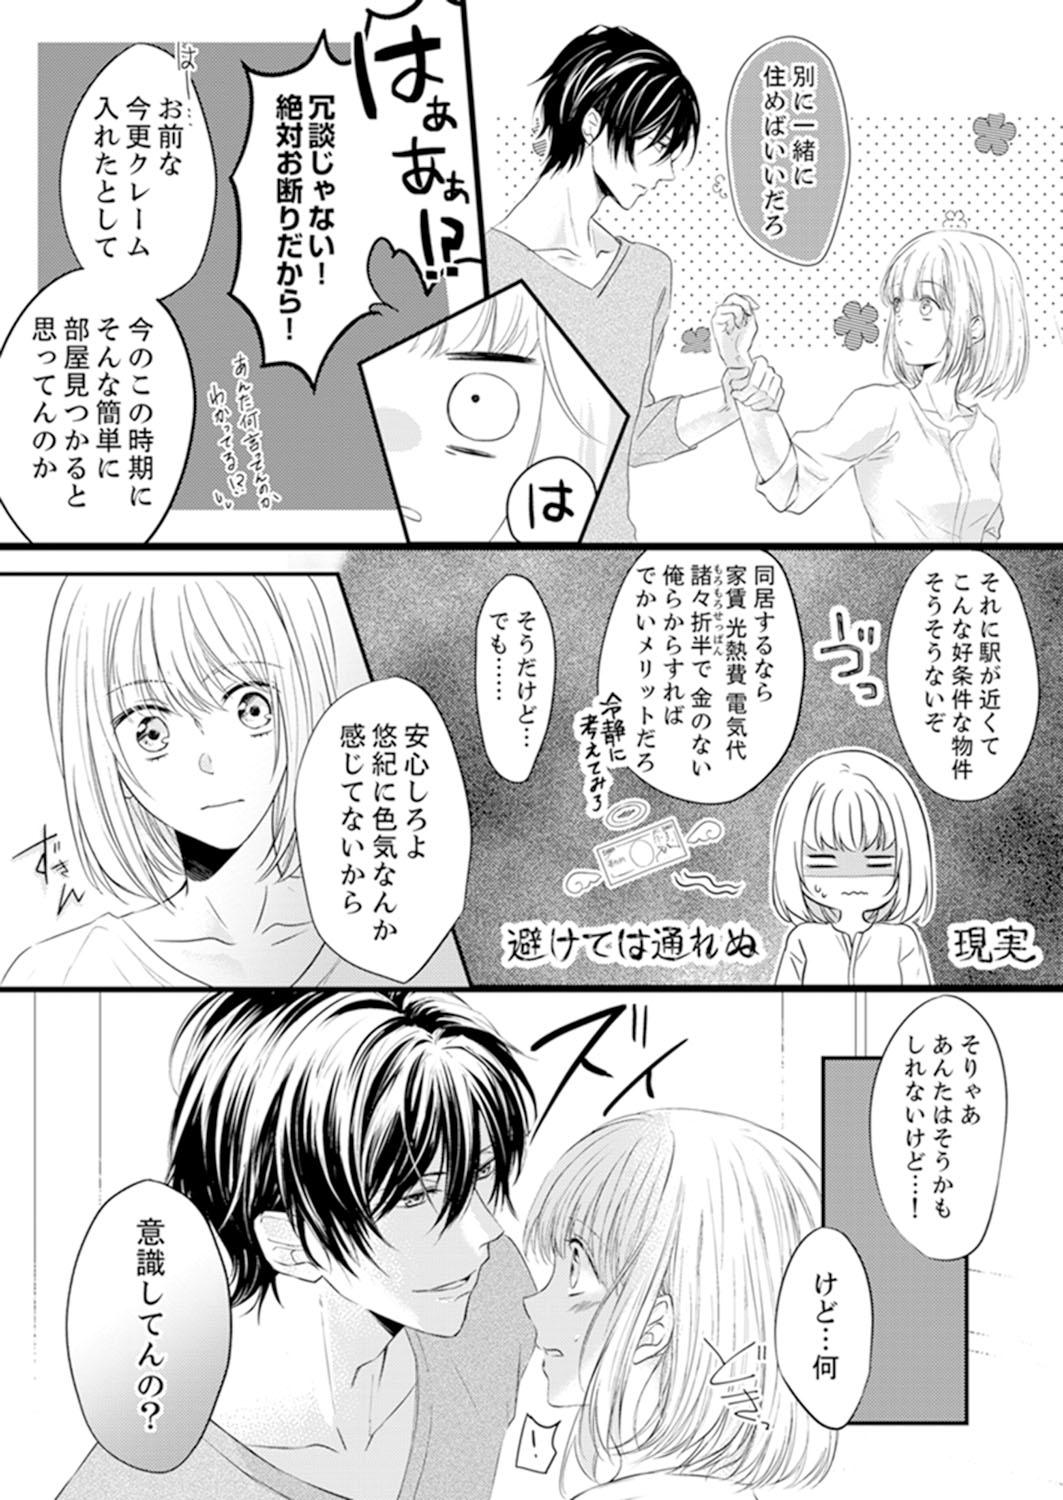 Old And Young ルール違反はイクまでＨ!?～幼なじみと同居はじめました Ch.1-22 Bigbooty - Page 7